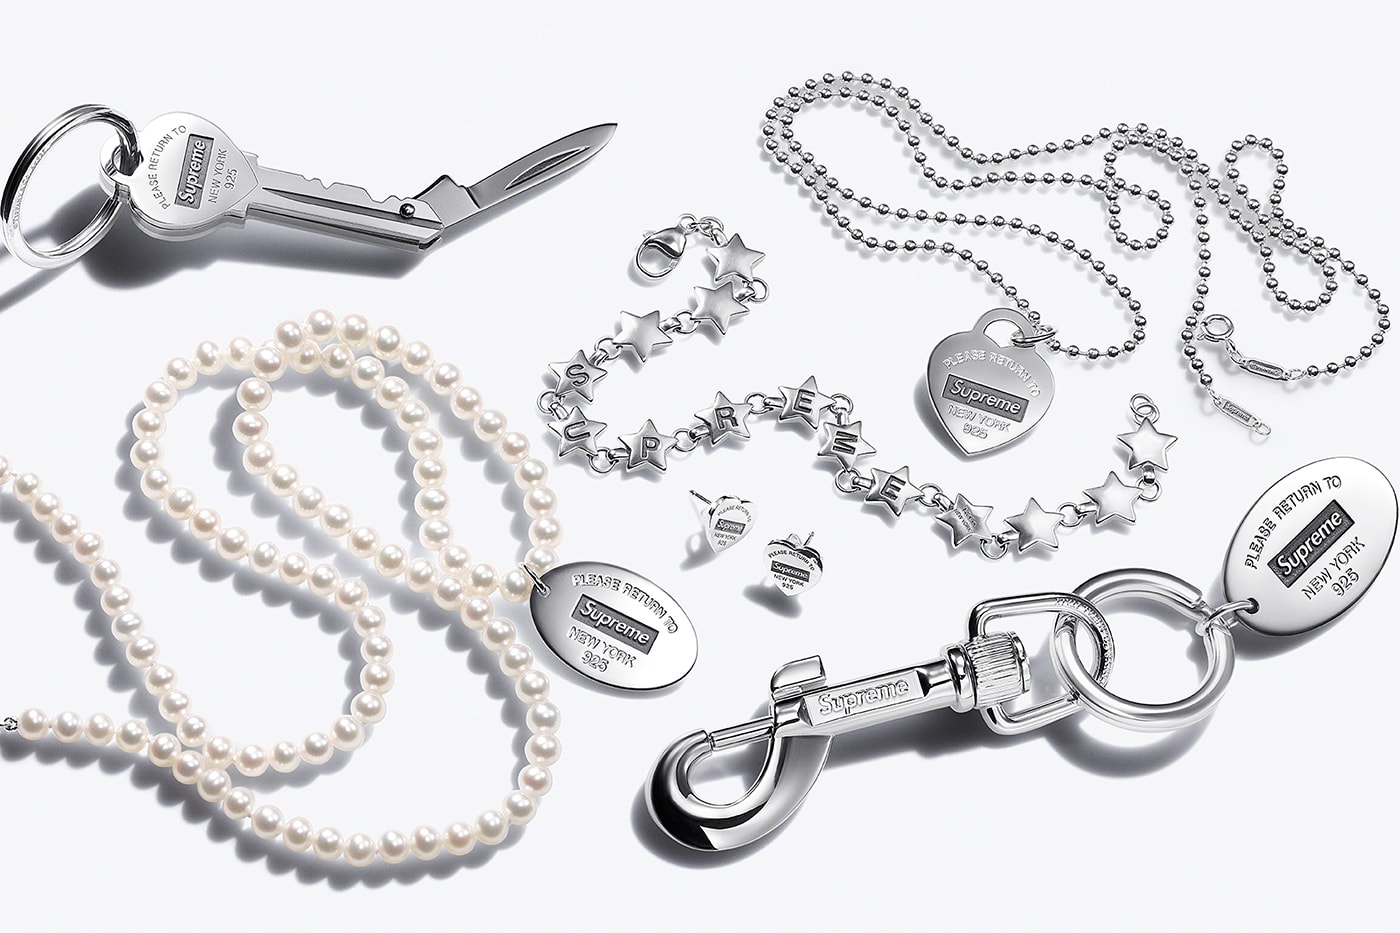 Tiffany's Most Iconic Collections, 12 Tiffany & Co Fun Facts